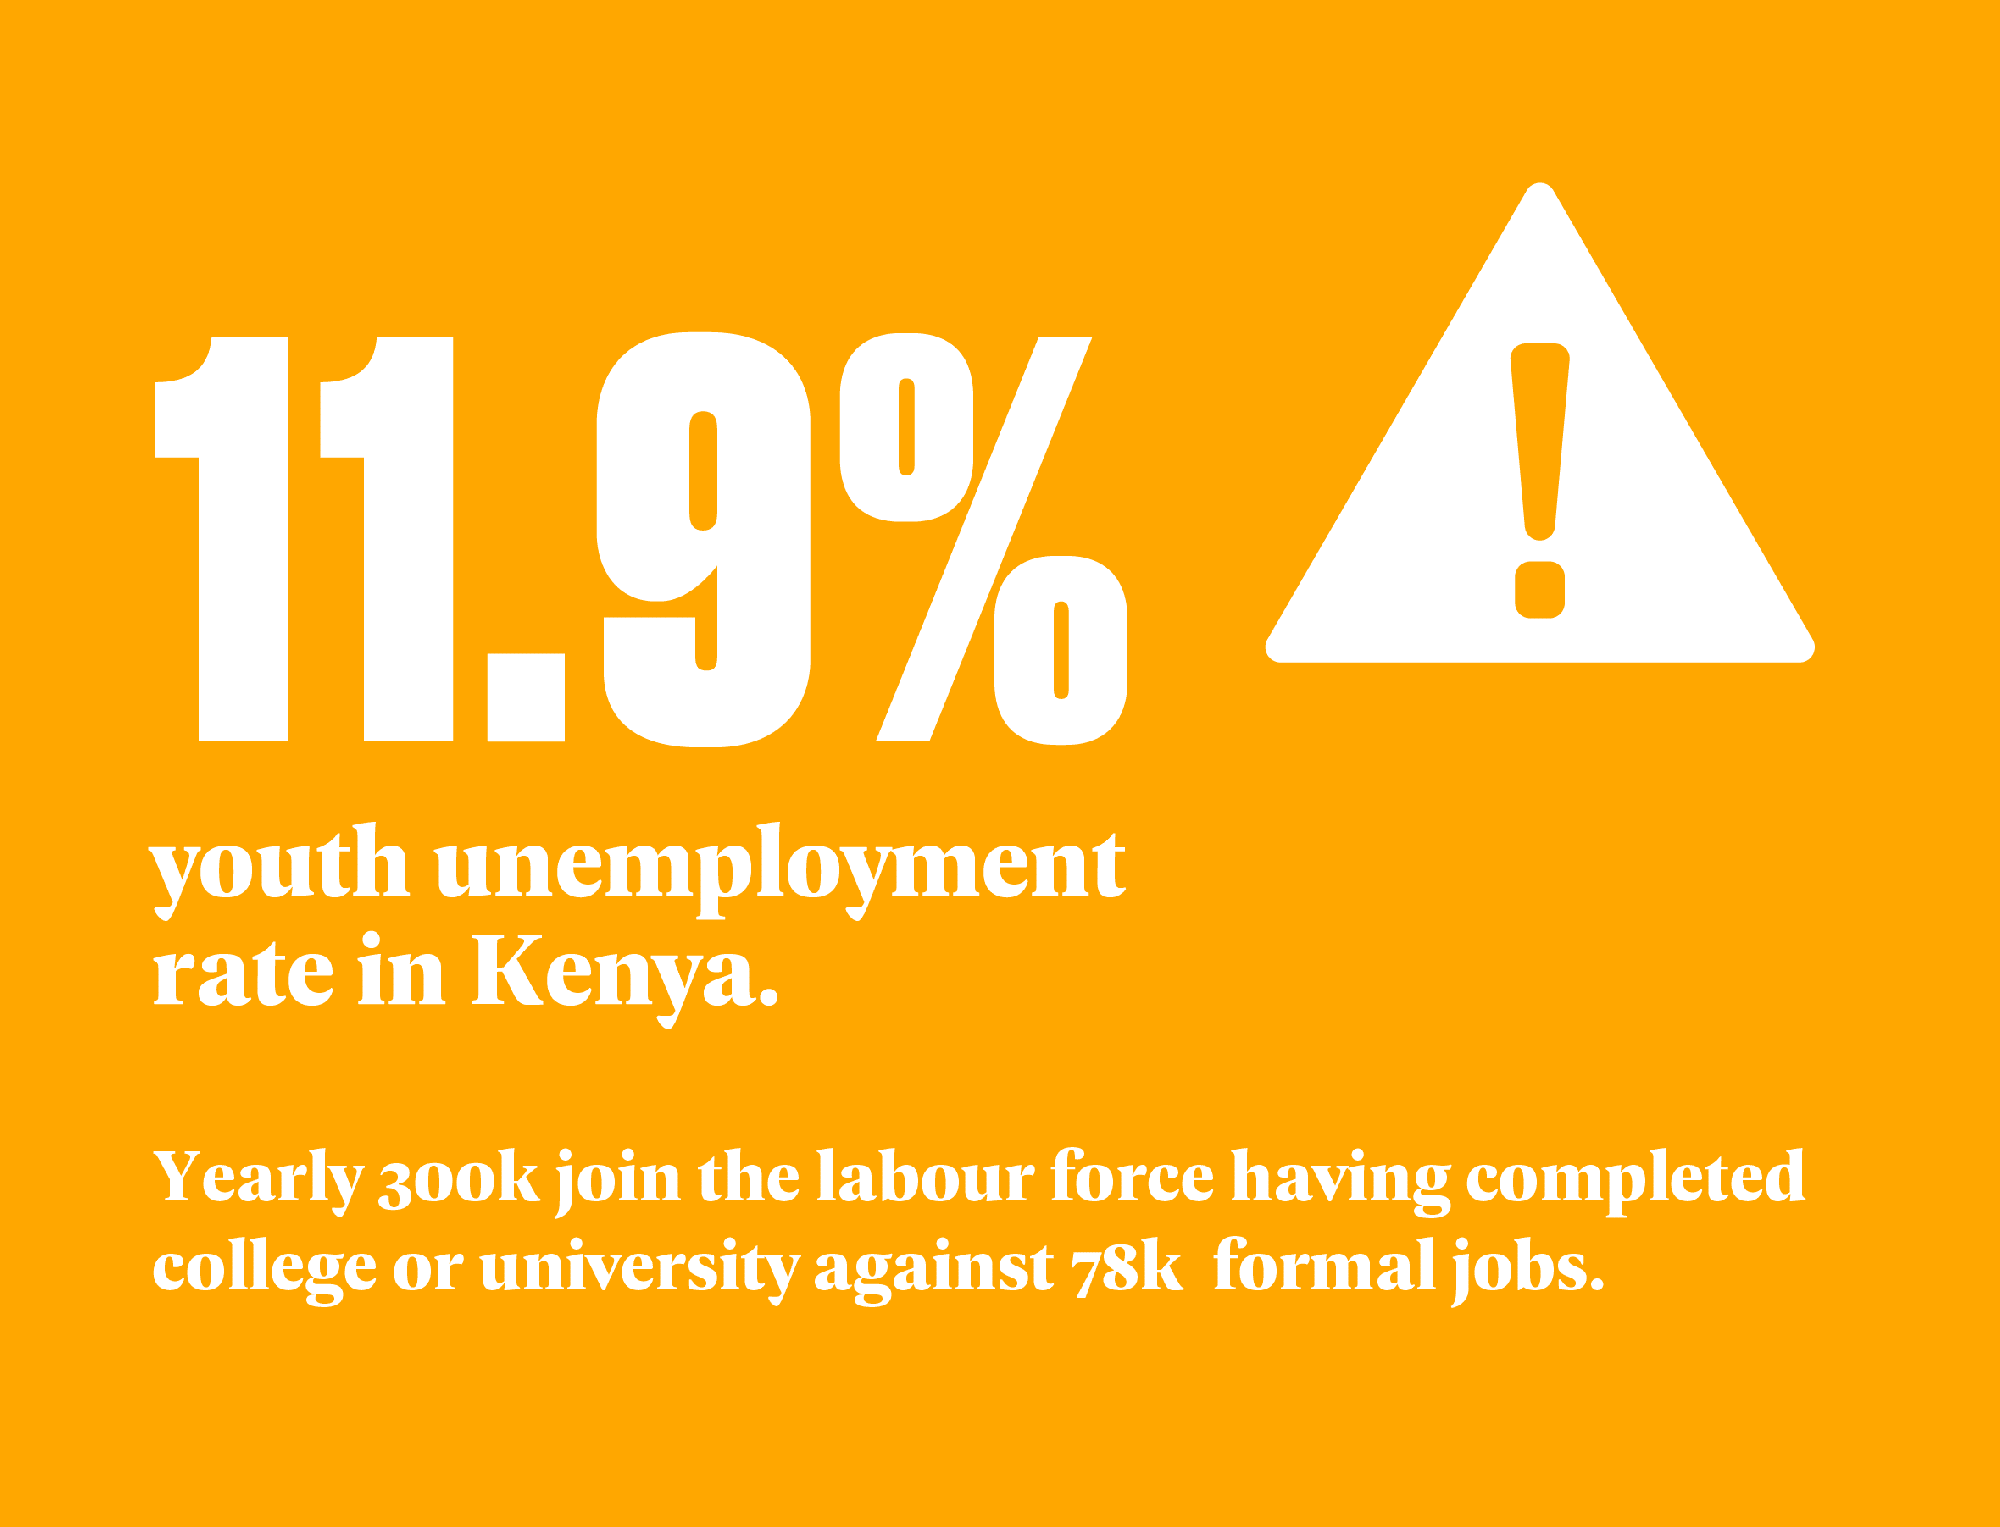 11.9% youth unemployment rate in Kenya